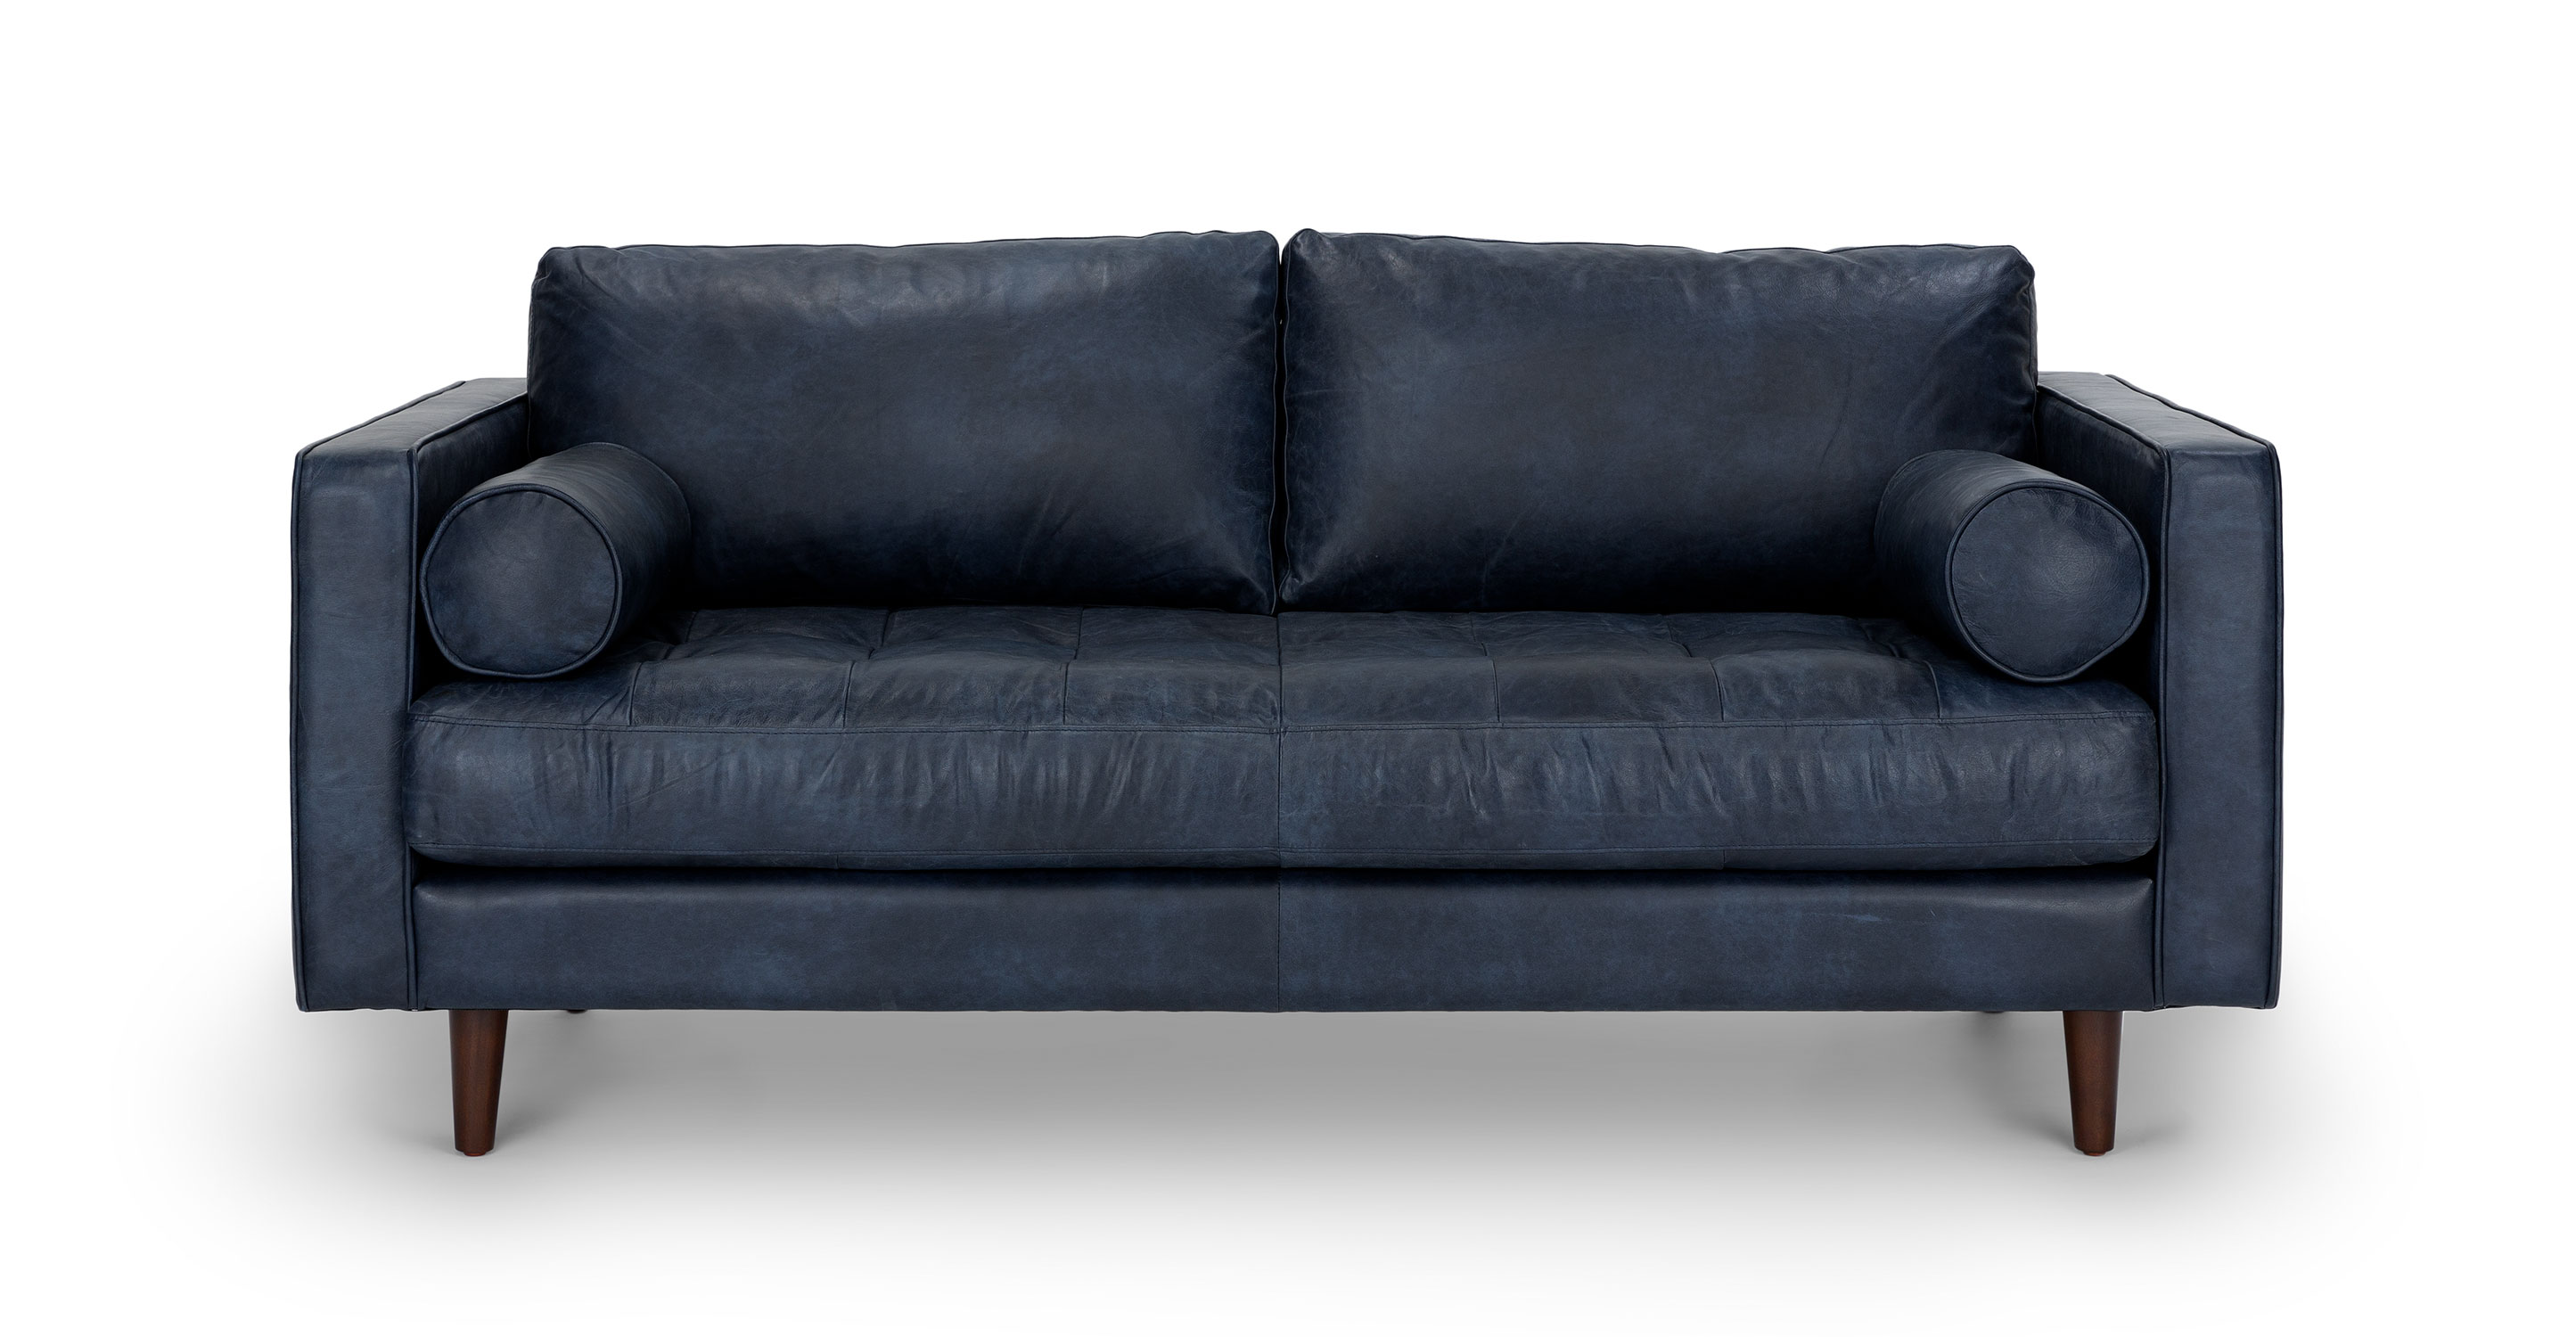 Drink water crisis Romanschrijver Sven Walnut & Oxford BlueLeather 3 Seater Sofa | Article